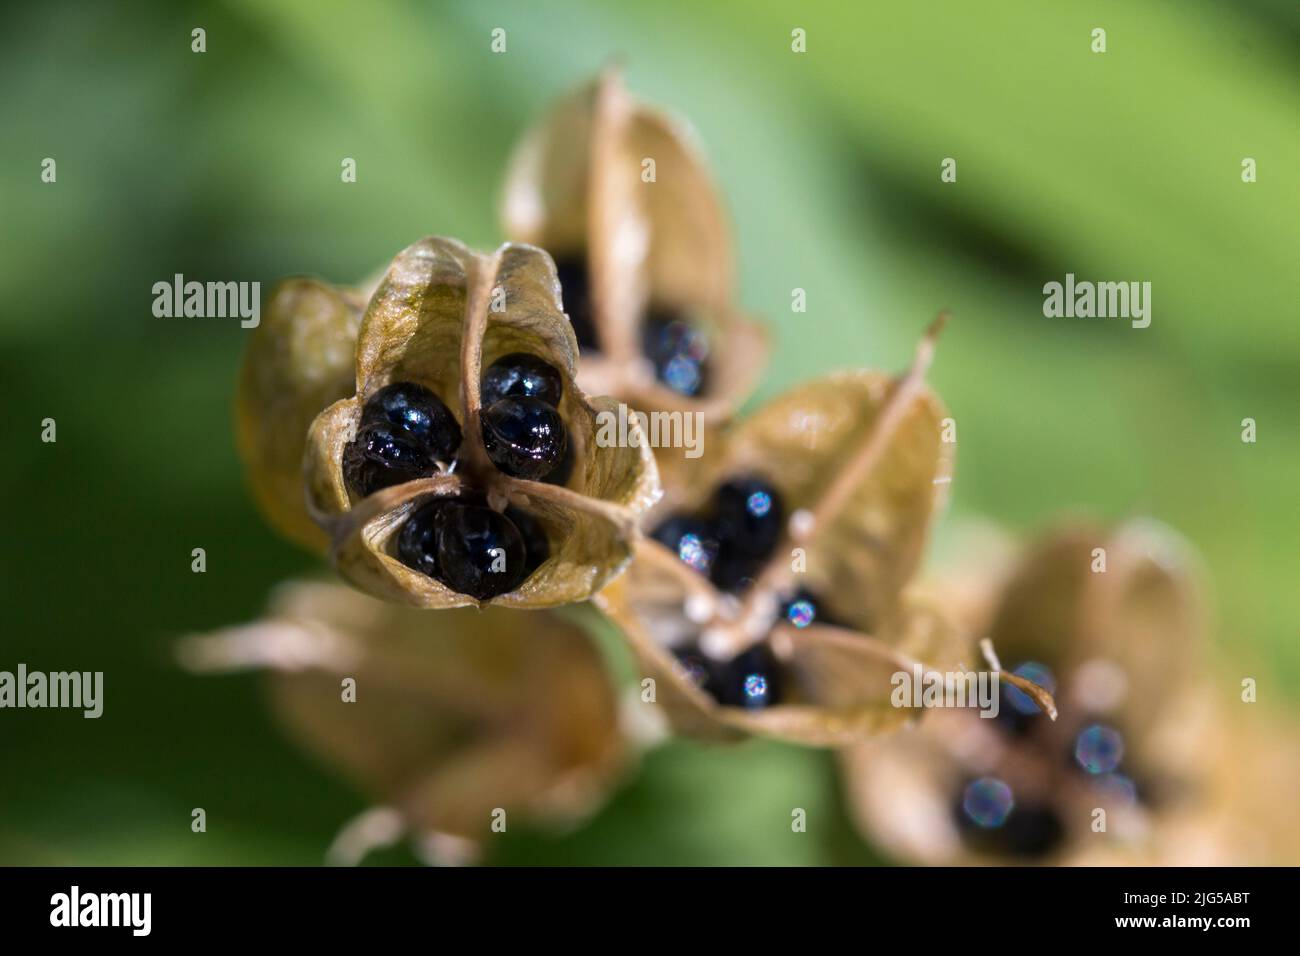 Spanish bluebell seeds in papery pale brown triple pods shiny black rounded seeds in dried transluscent pods devided into three cells each with seeds Stock Photo